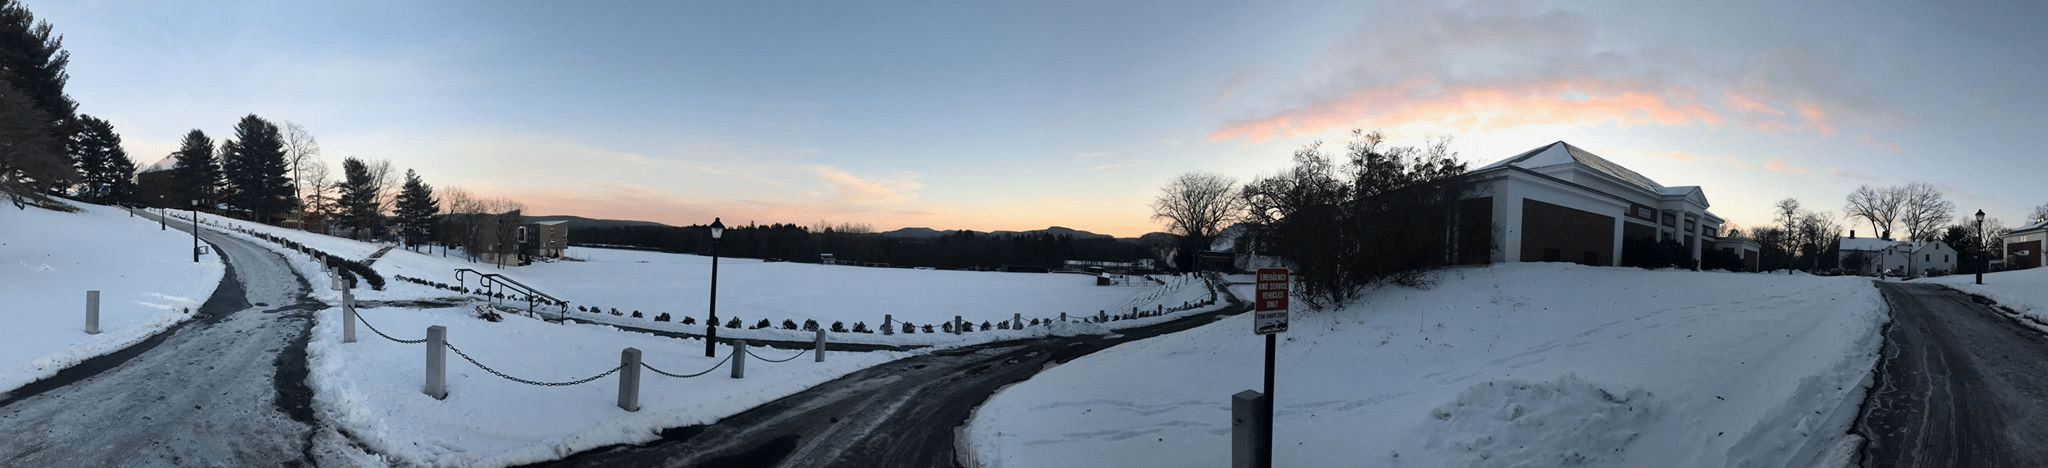 Landscape in Amherst with sunset and snow covered field